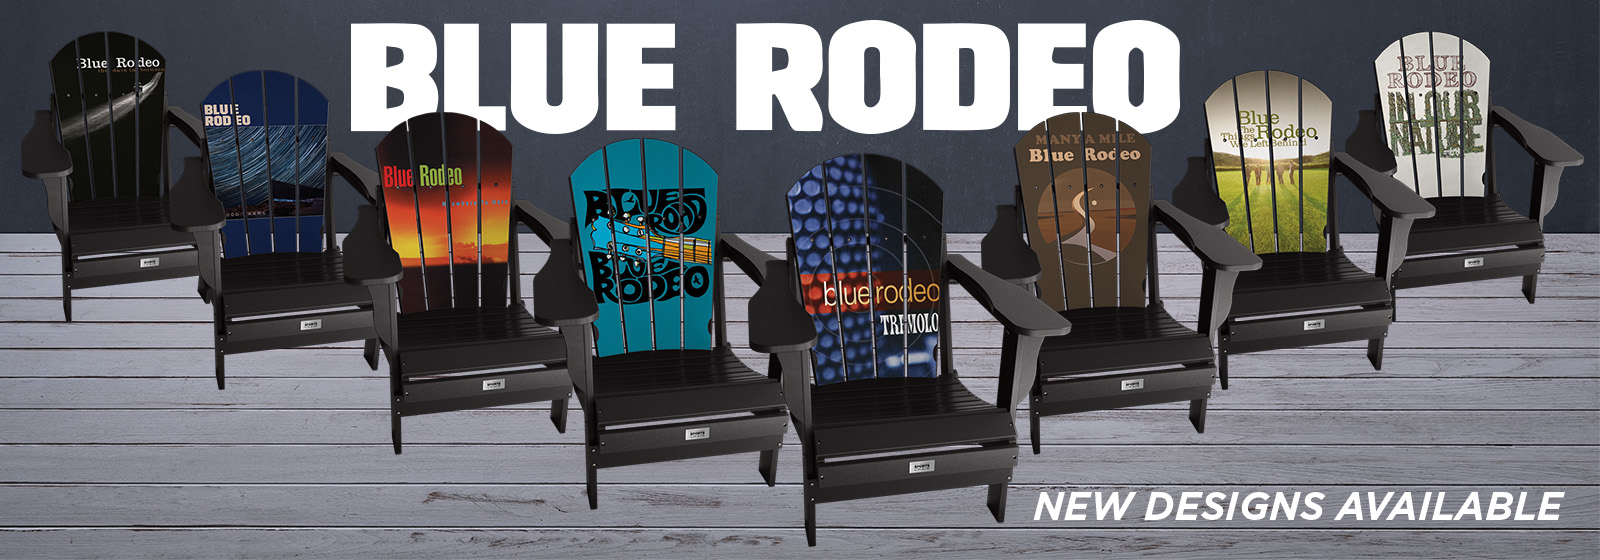 Blue Rodeo Chair Banner 1600x560